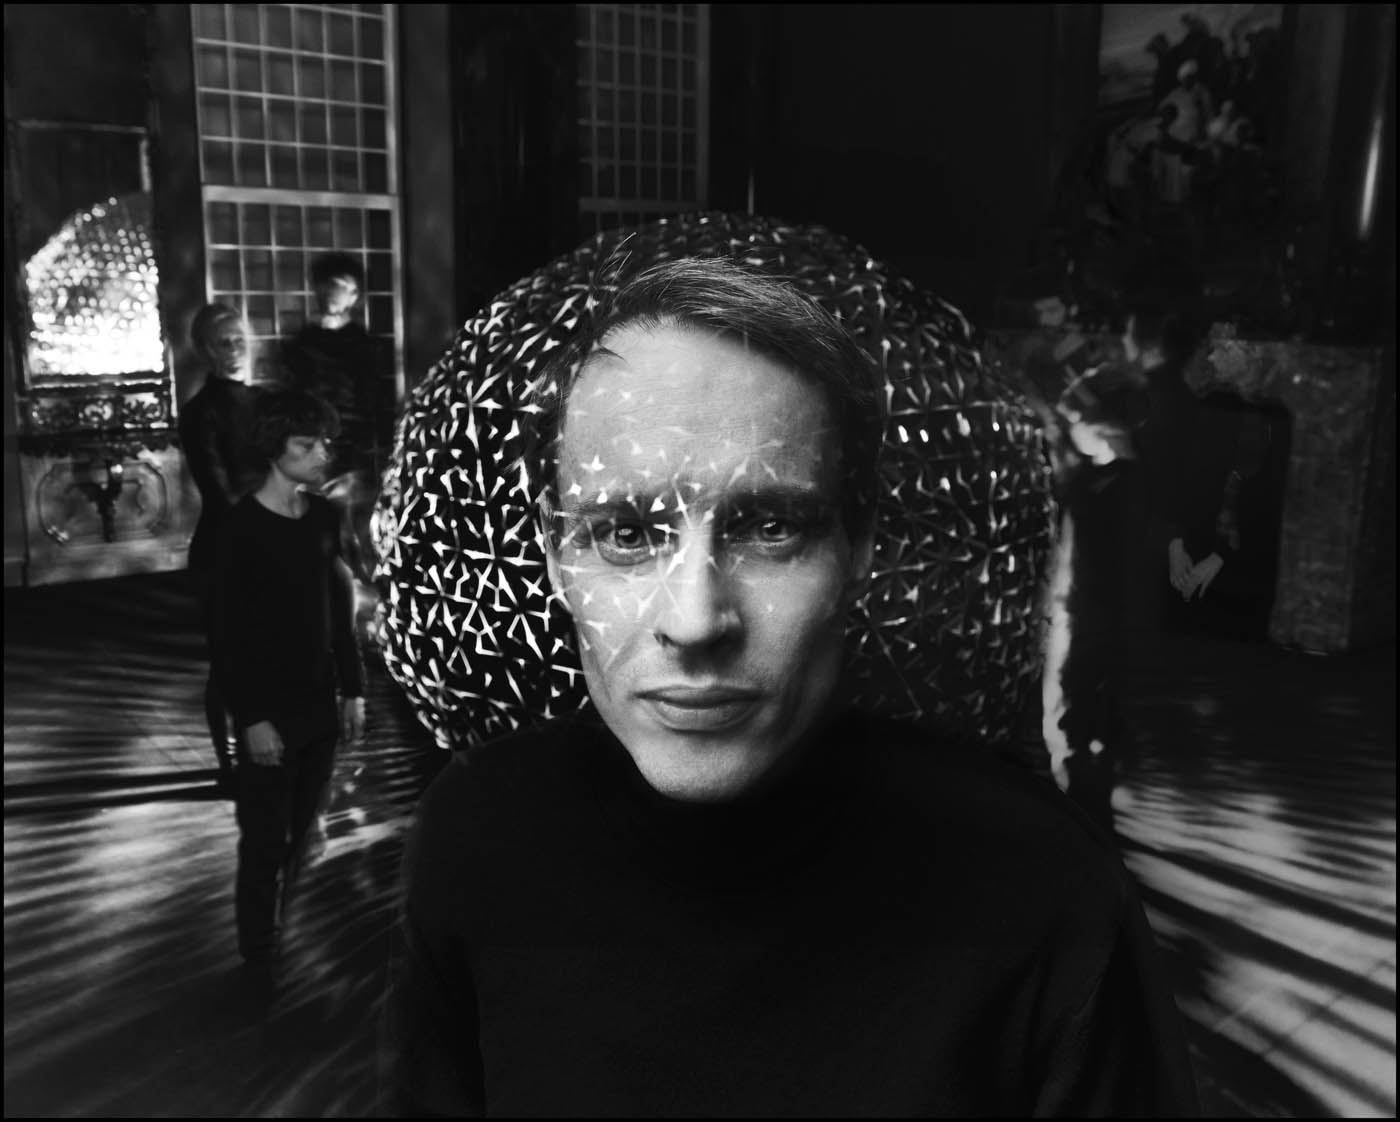 Designing the Future- An introduction to Daan Roosegaarde